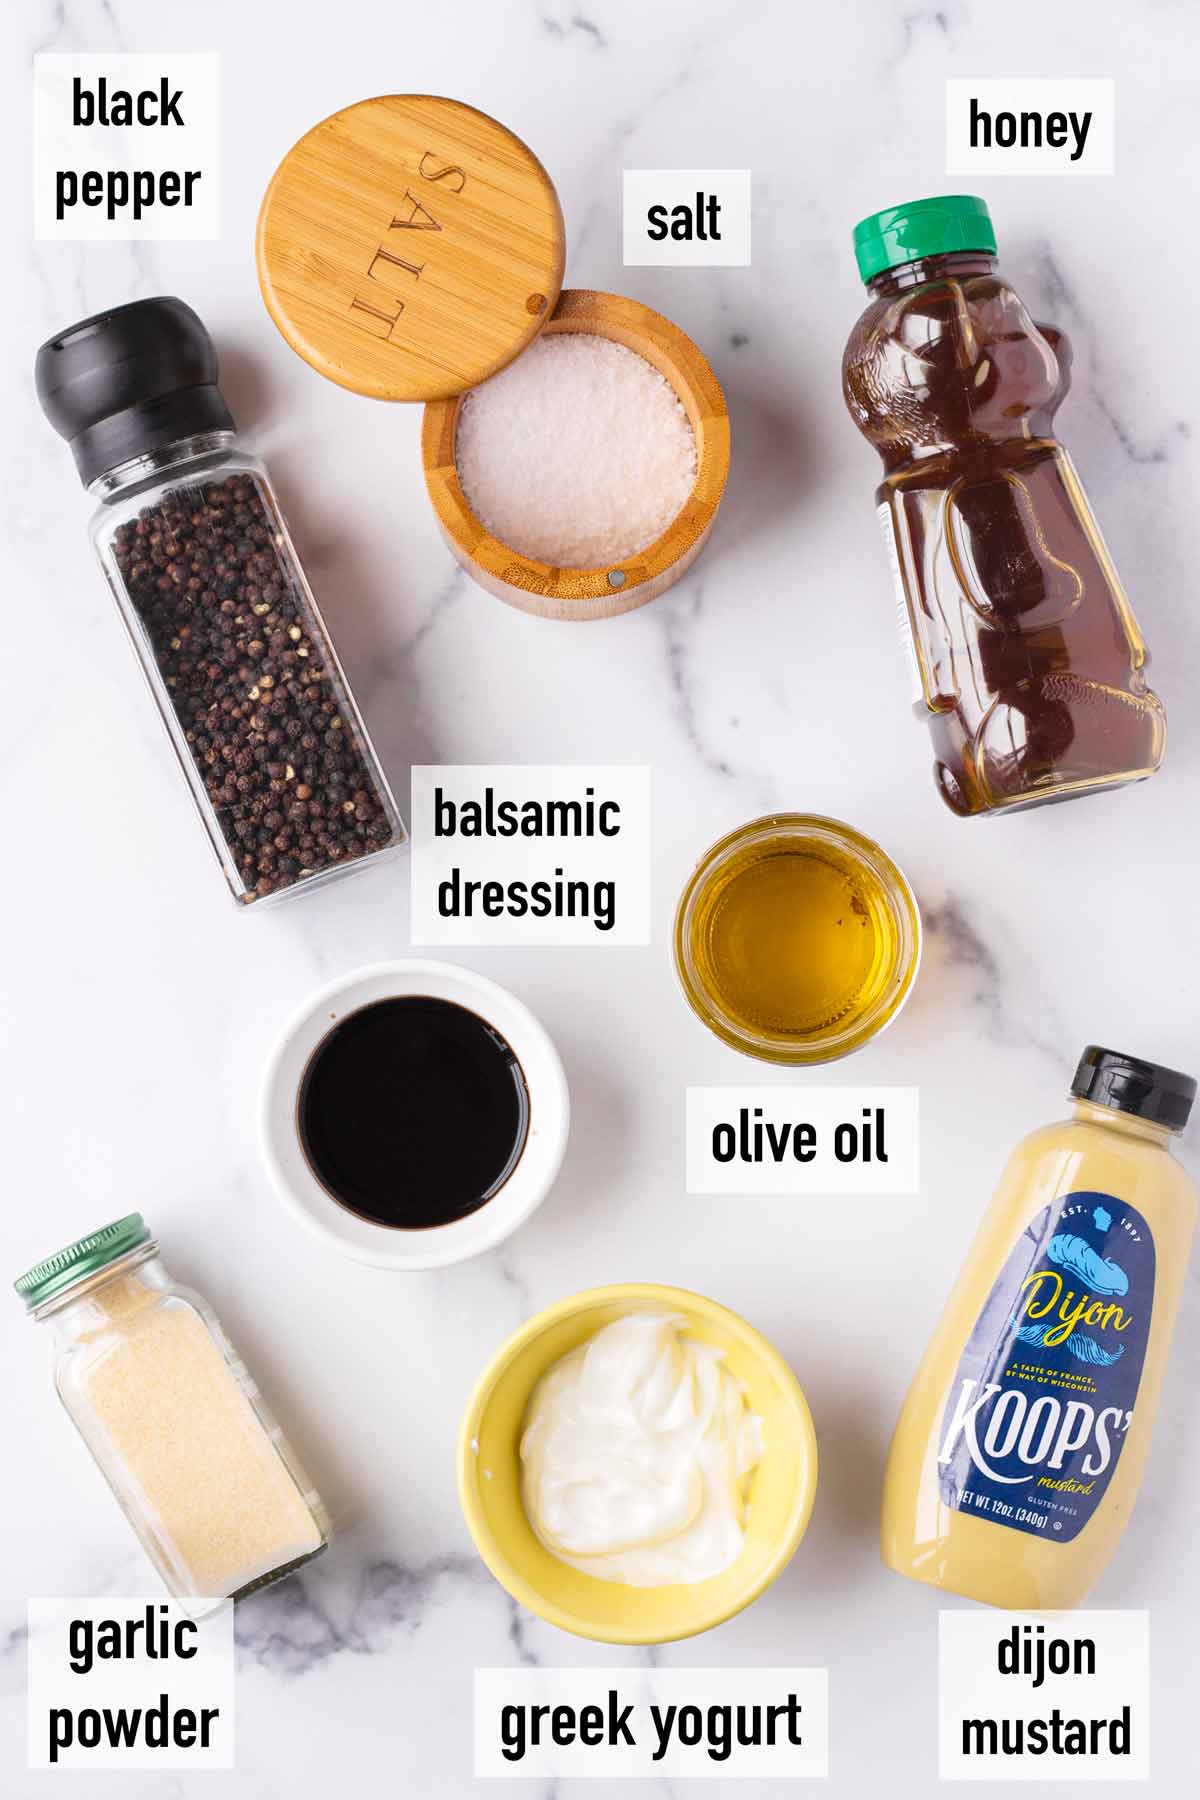 labeled ingredients to make creamy balsamic dressing